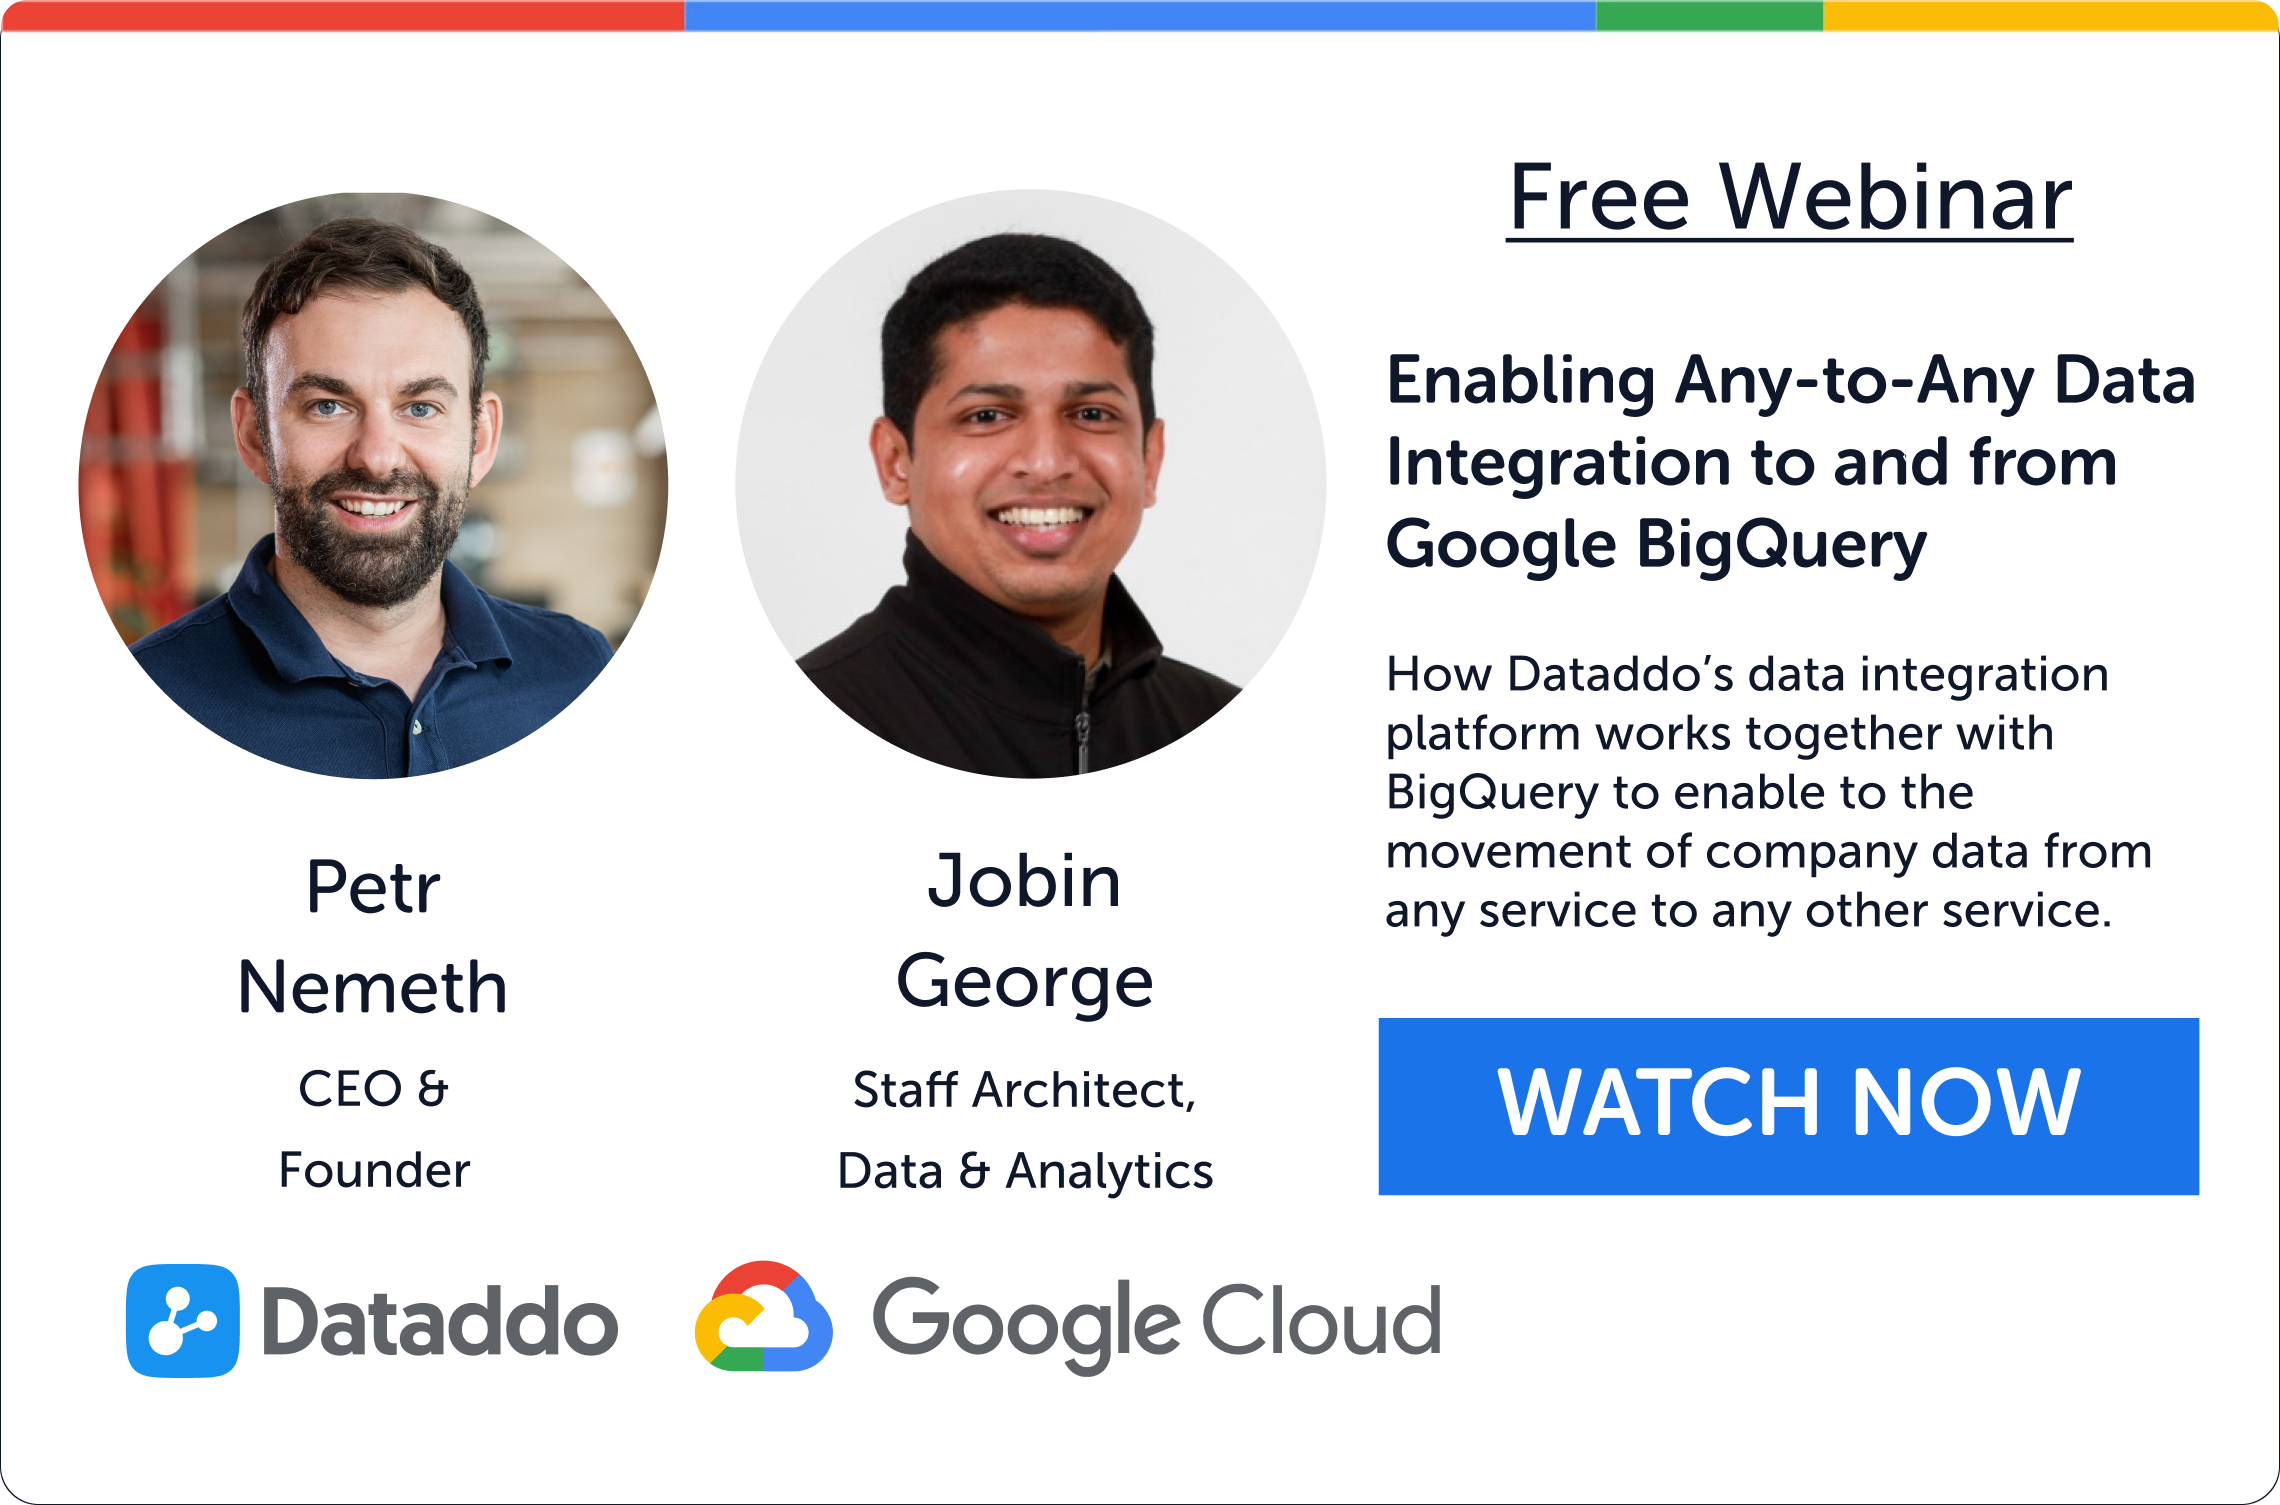 [WEBINAR] Any-to-Any Data Integration to and from Google BigQuery